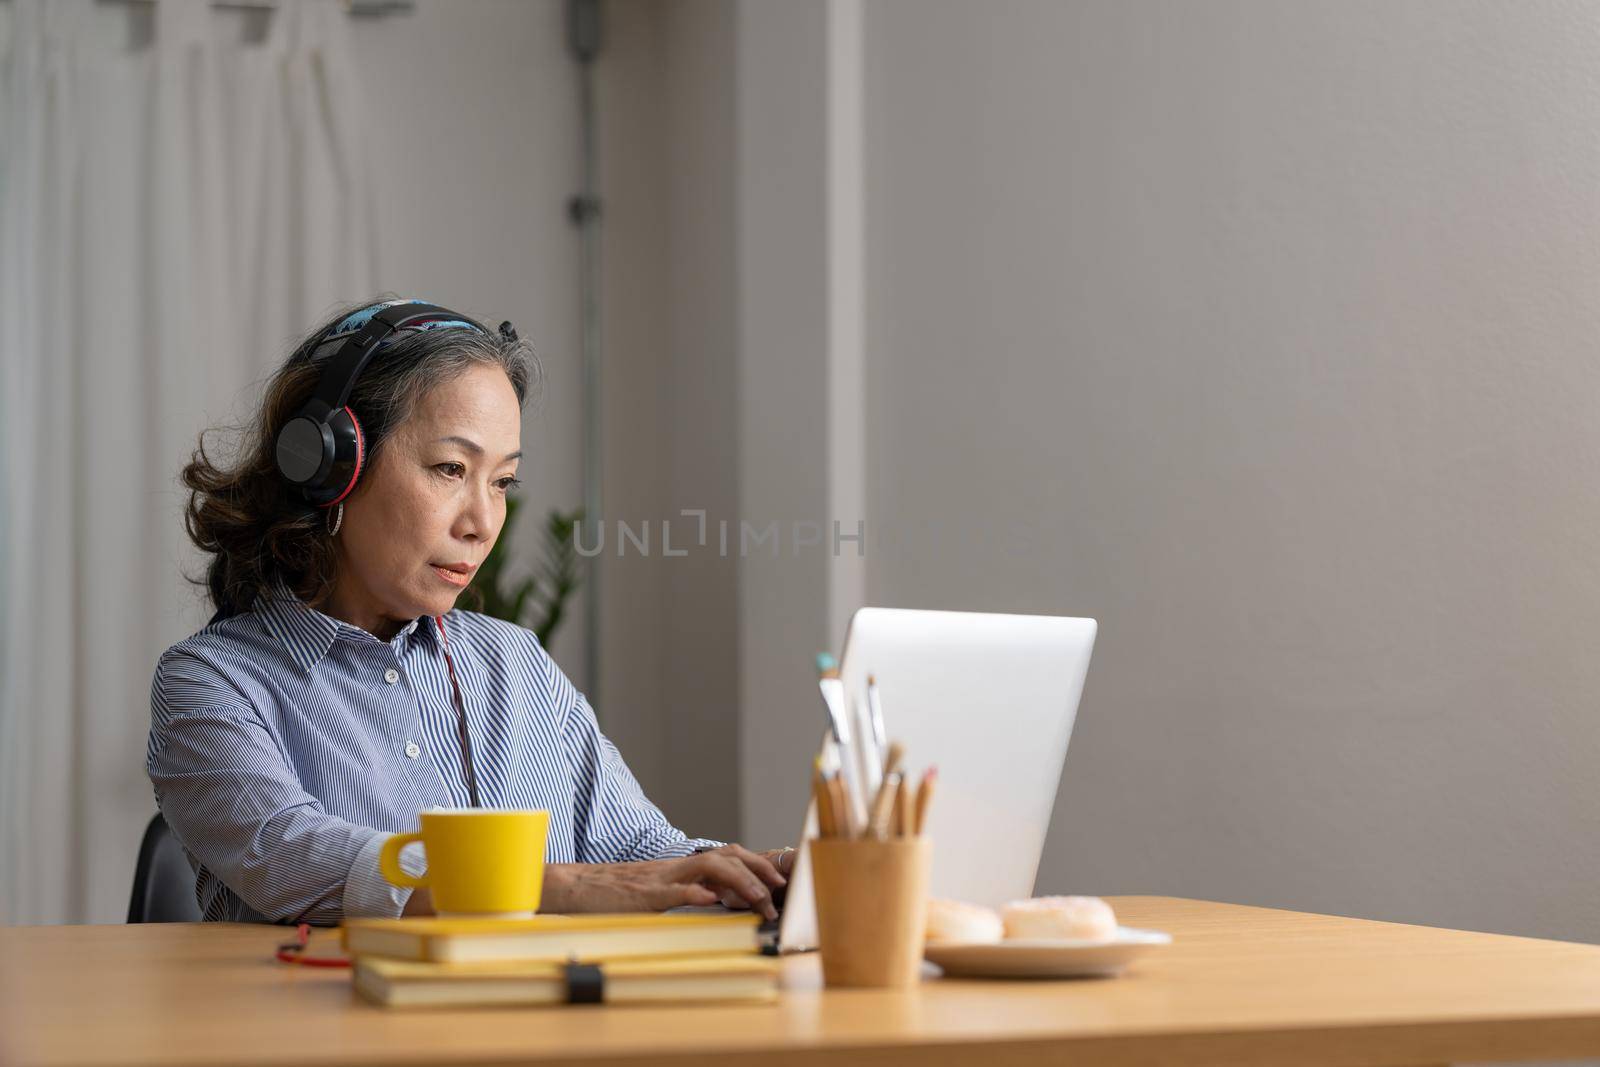 Mature asian woman wearing headphones using laptop, making video call, sitting at table in kitchen, senior teacher mentor wearing glasses engaged online conference, recording webinar, teaching.